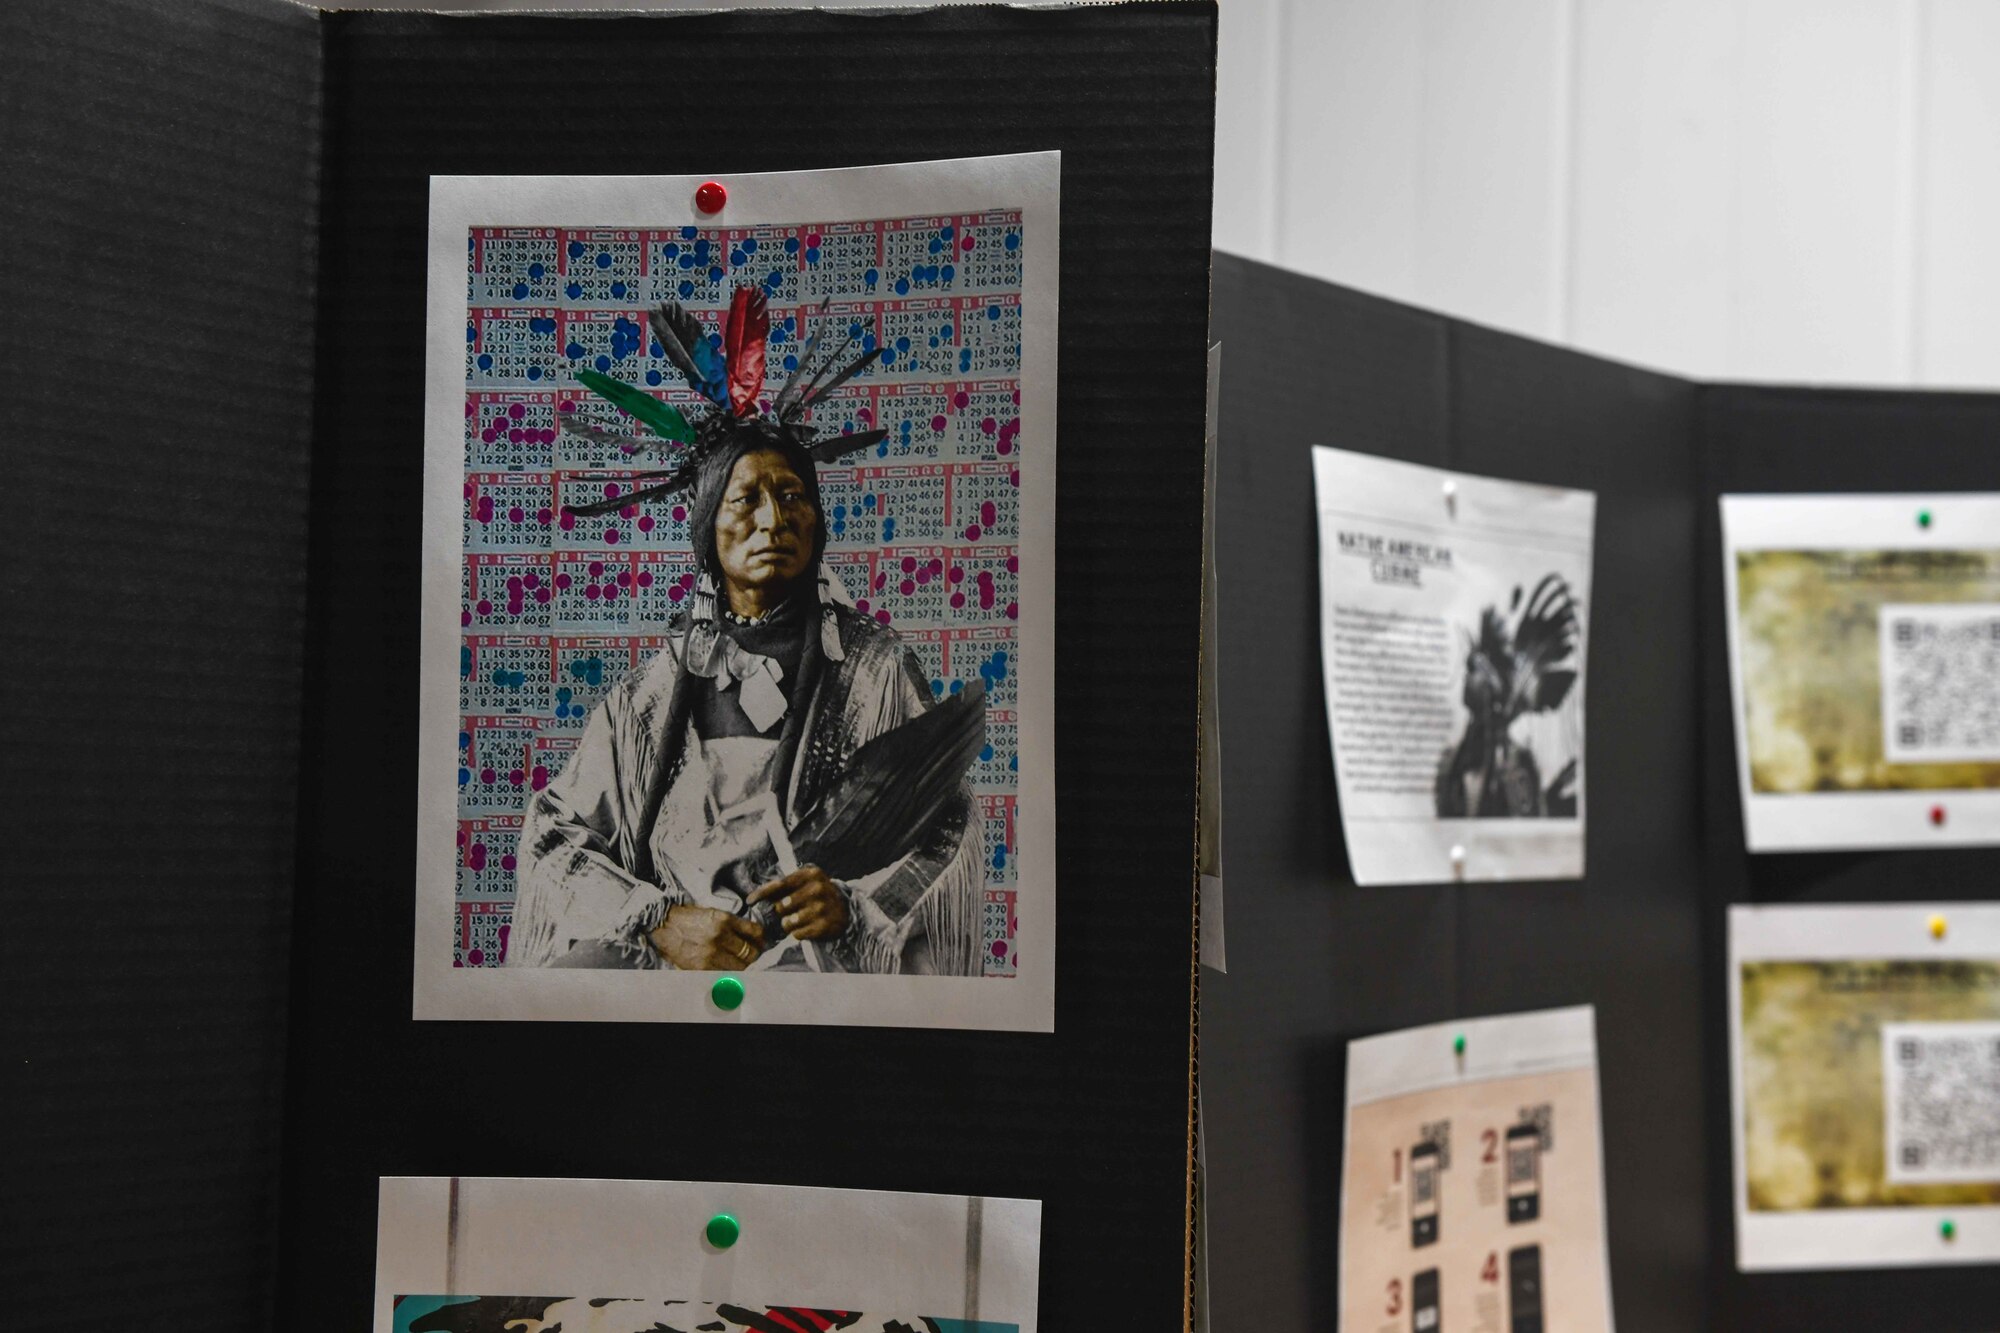 An illustration of a Native American hangs on a board in one of the booths displayed at the Native American Heritage celebration at the Jackson County Expo Center on Nov. 19, 2022, in Altus, Oklahoma. Vendors stood beside the posters ready to discuss information about local tribes and reservations. (U.S. Air Force photo by Airman 1st Class Kari Degraffenreed)